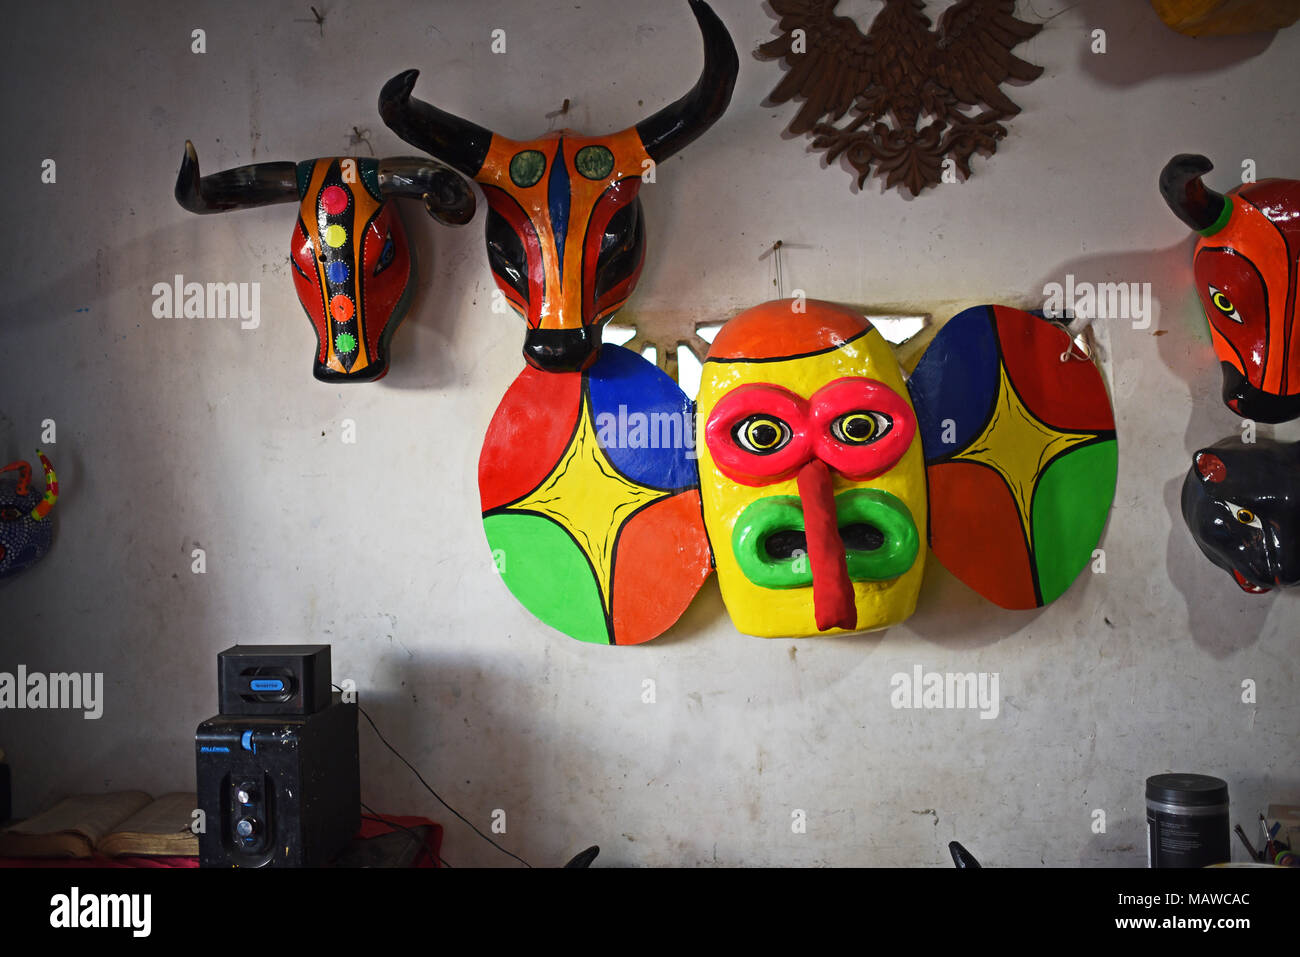 Handmade masks and crafts workshop, studio and shop in Barranquilla, Colombia. Stock Photo